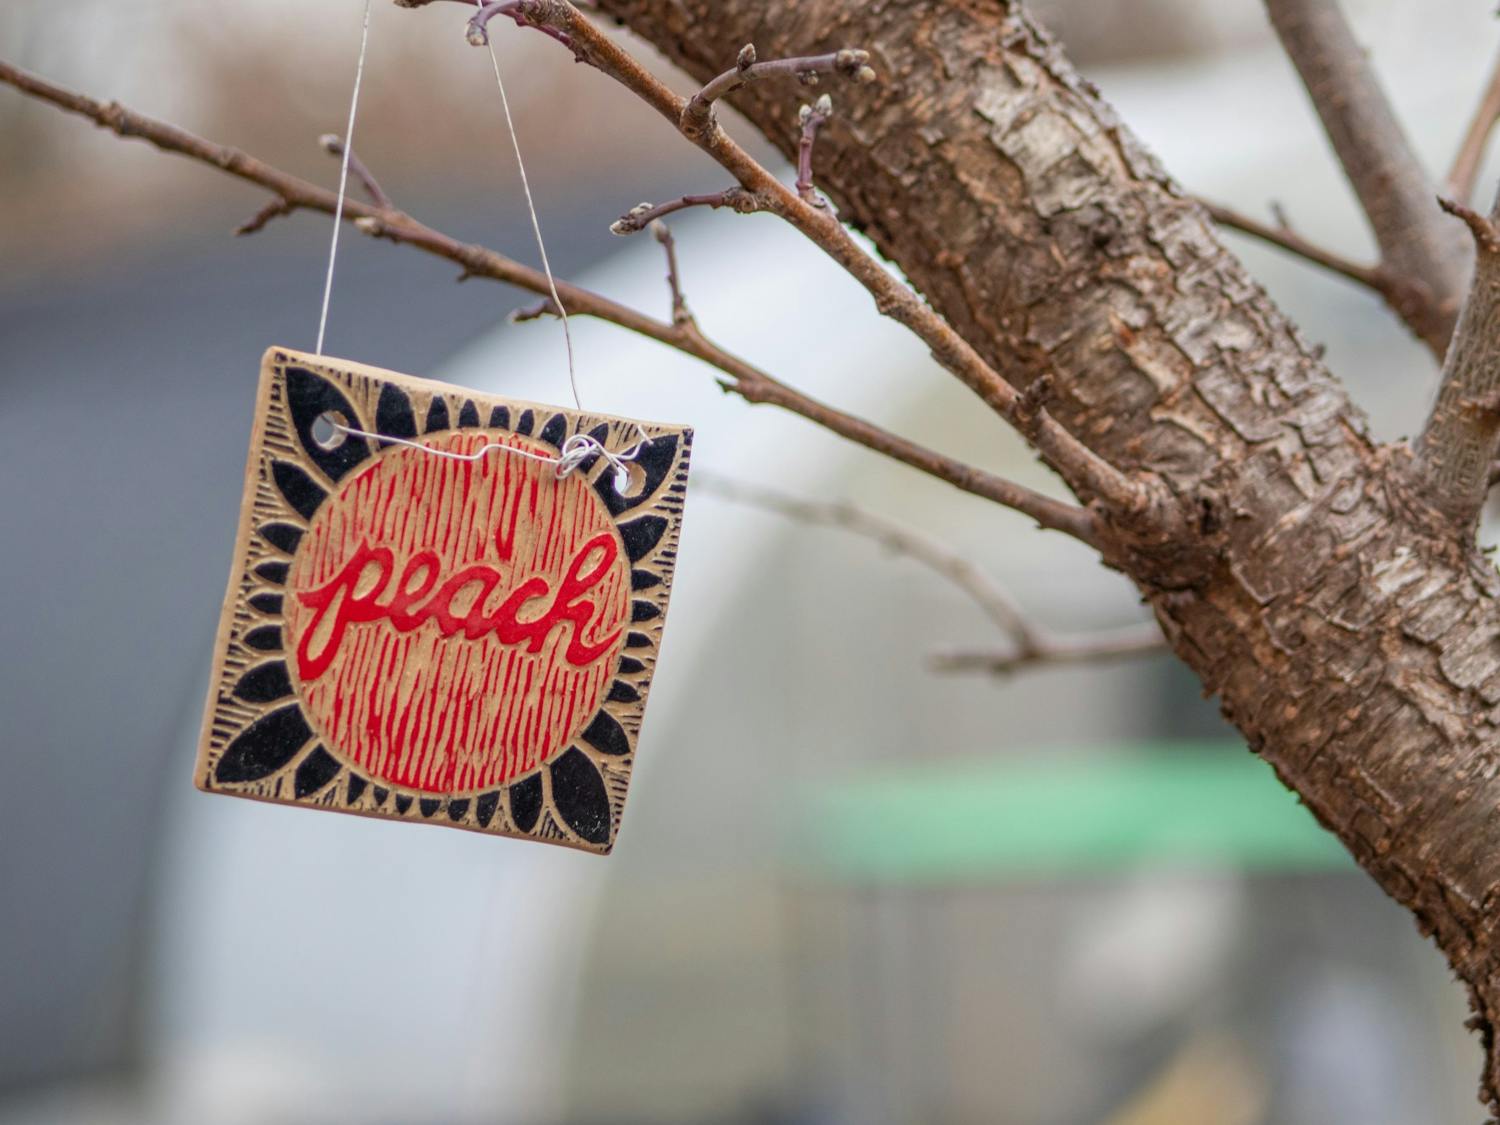 A tree marker hangs from a peach tree in the Sustainable Carolina Garden on Feb. 8, 2022. The garden has been growing at the University of South Carolina since 2007.